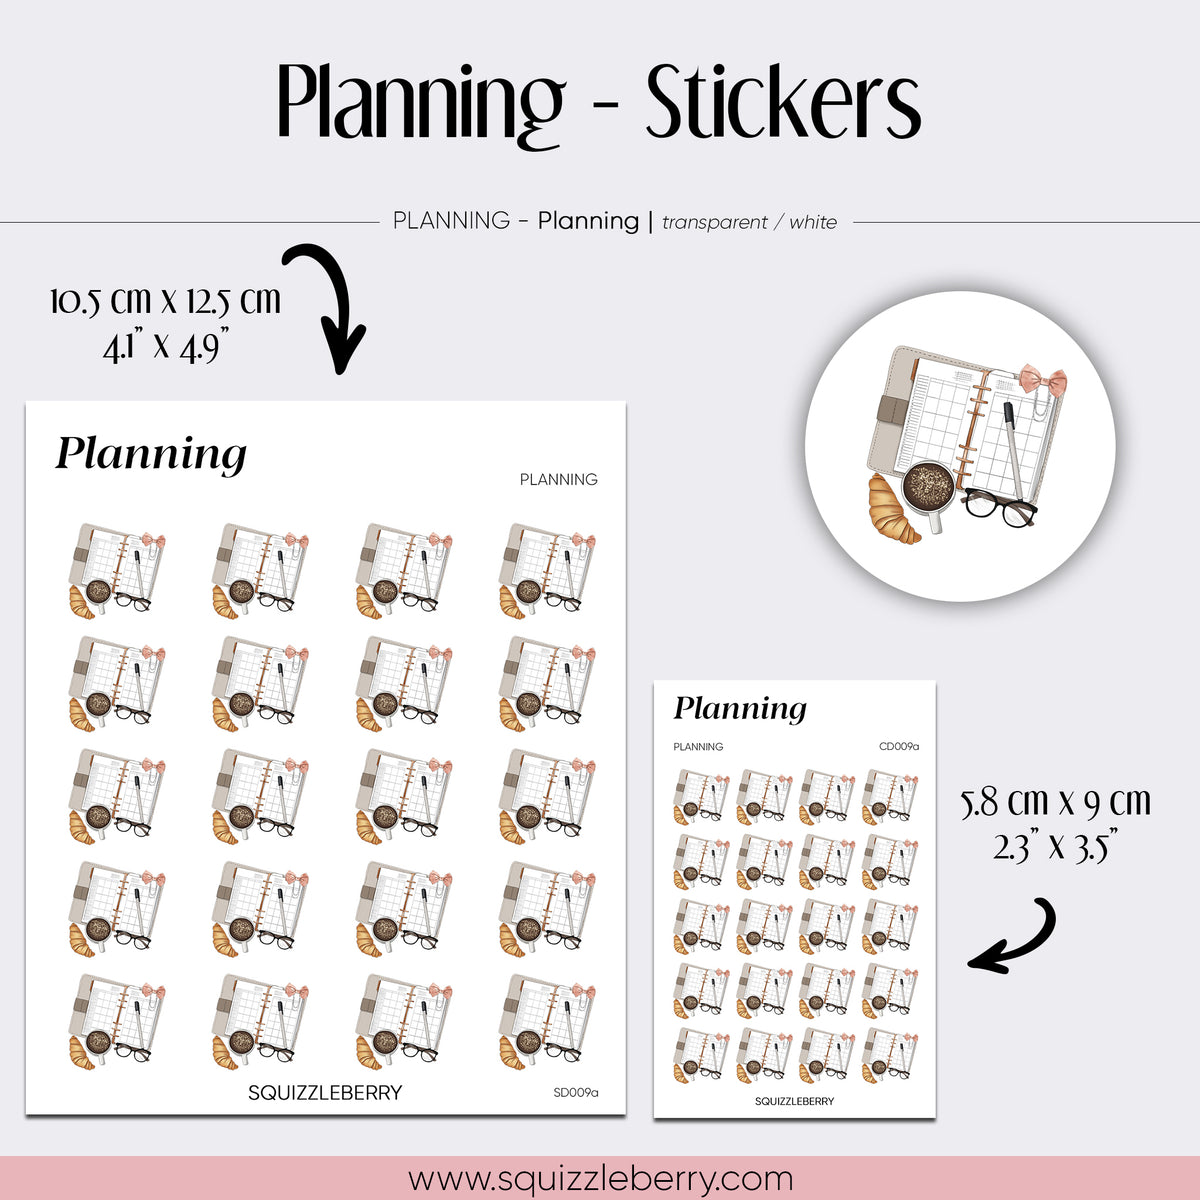 Planning Organiser - Stickers | SquizzleBerry